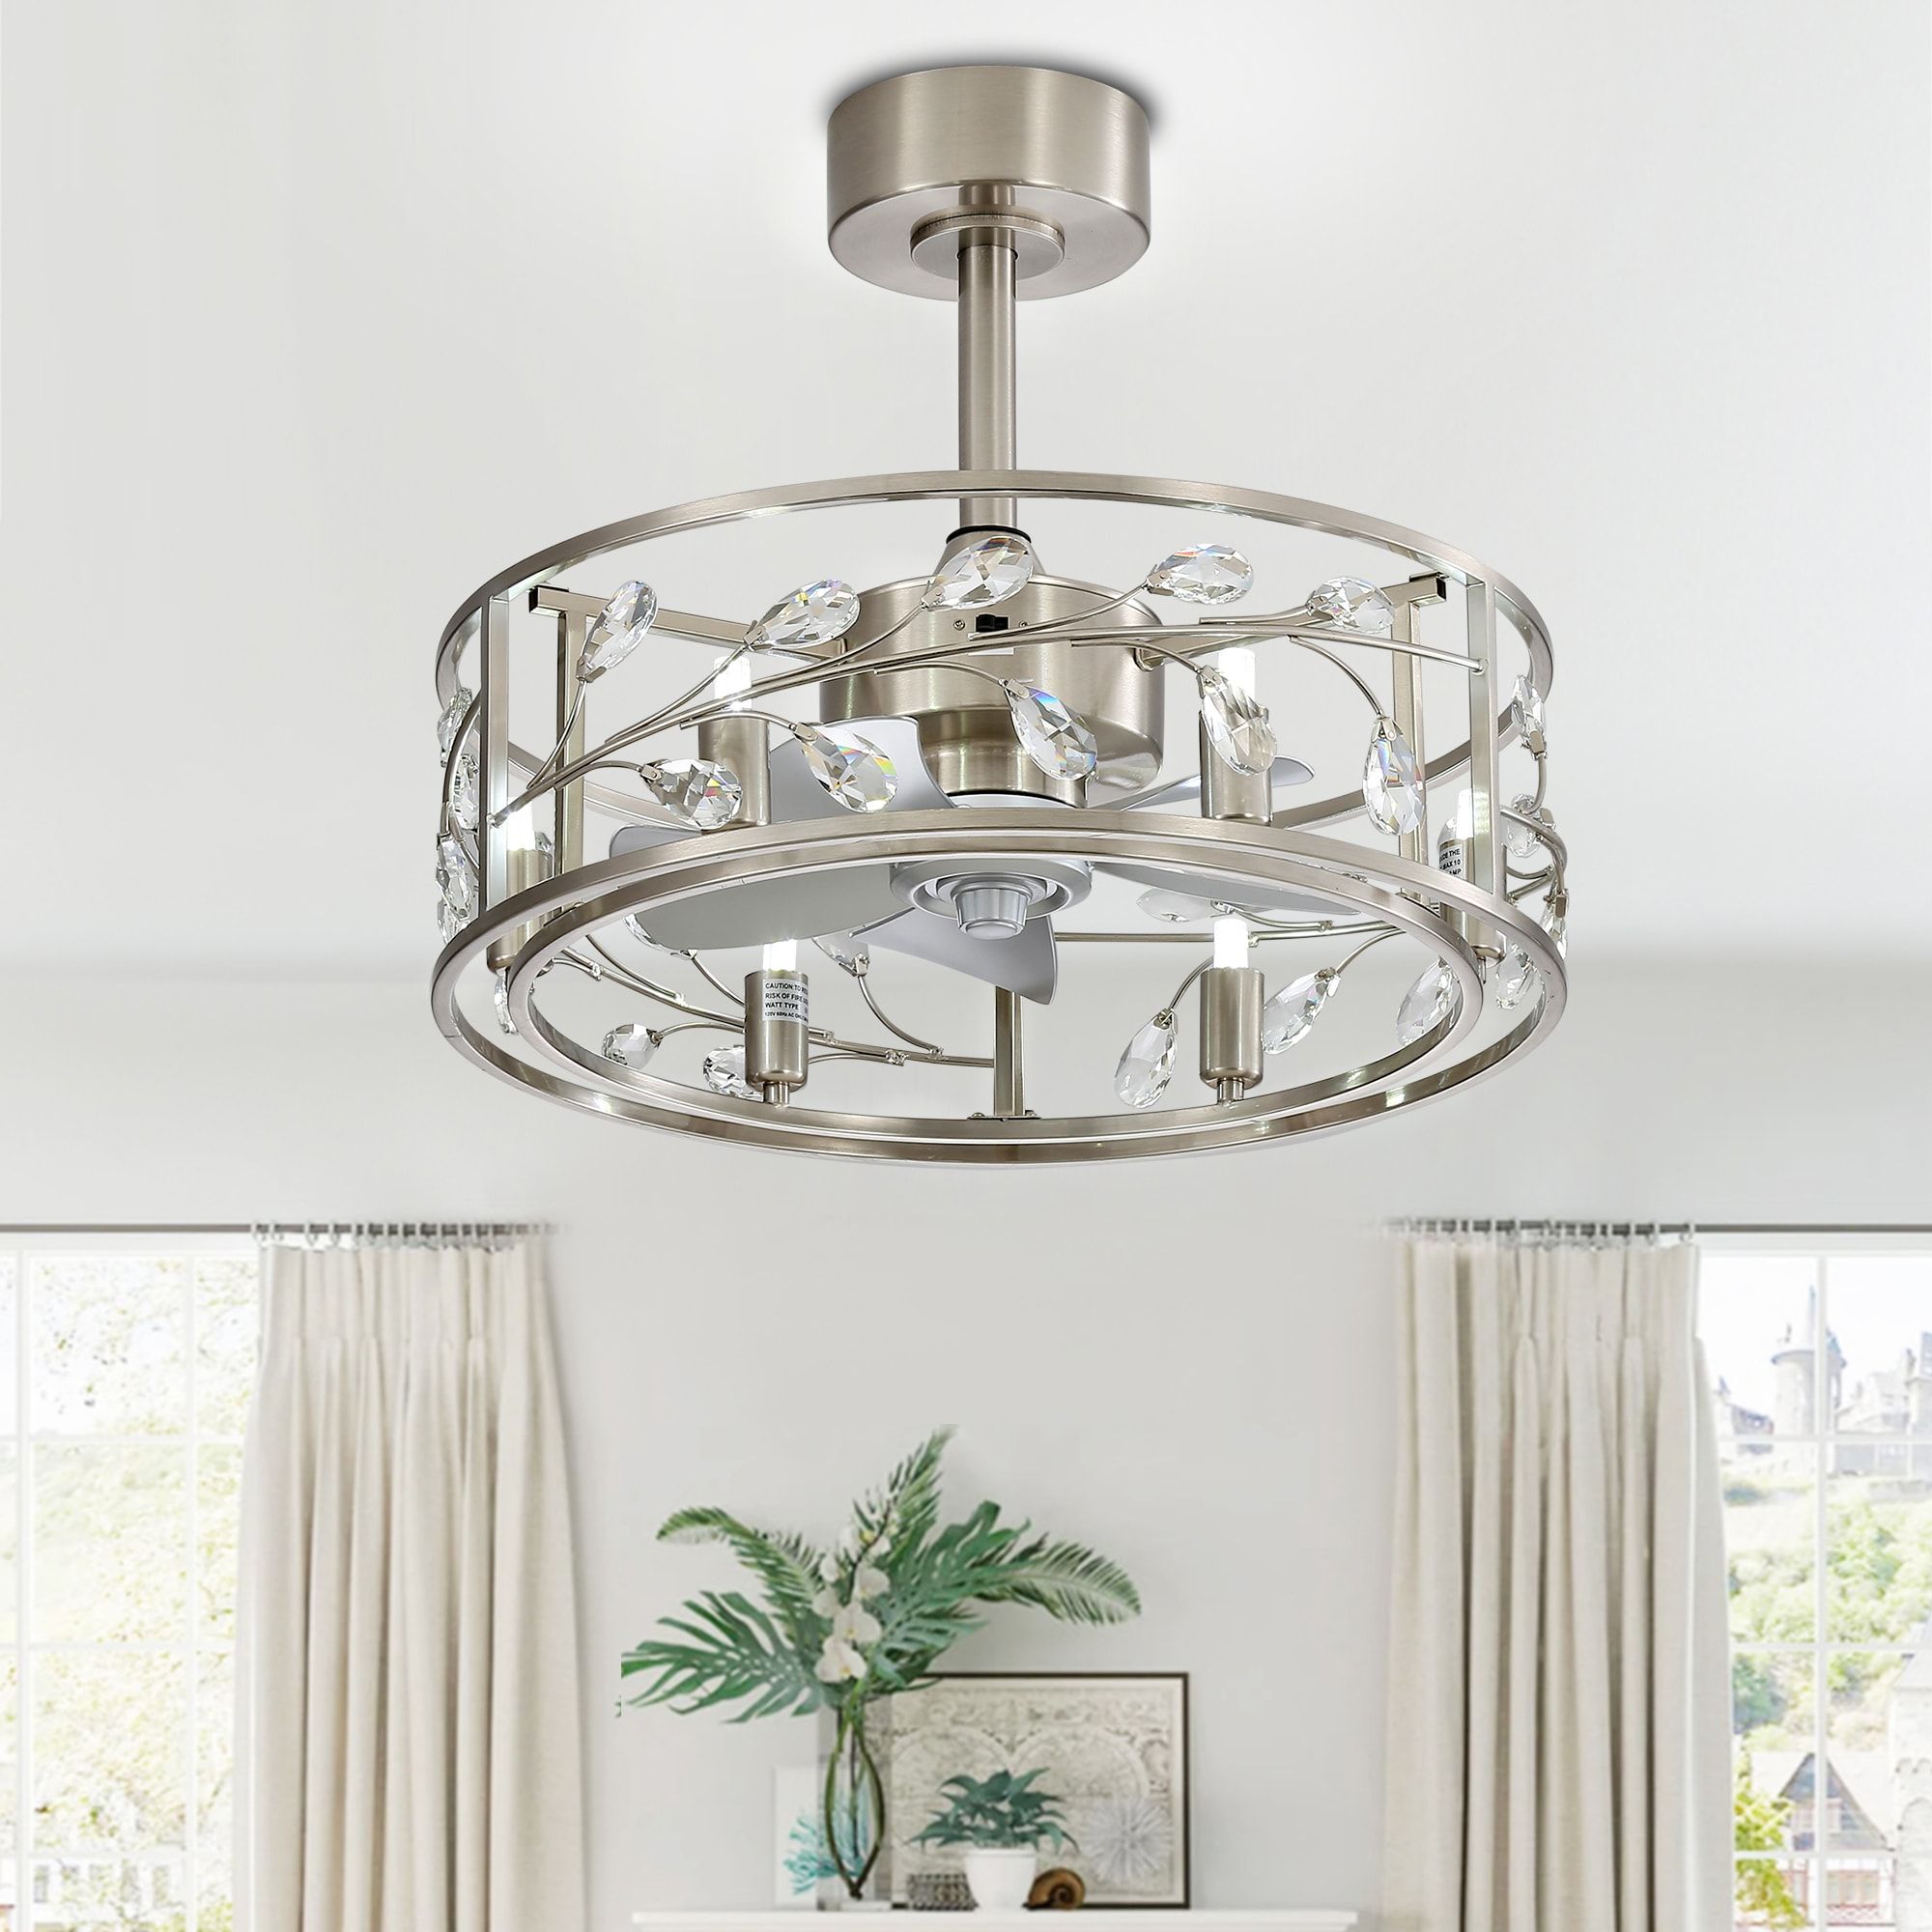 Stunning Crystal-Adorned Ceiling Fans: A Touch of Elegance for Any Room